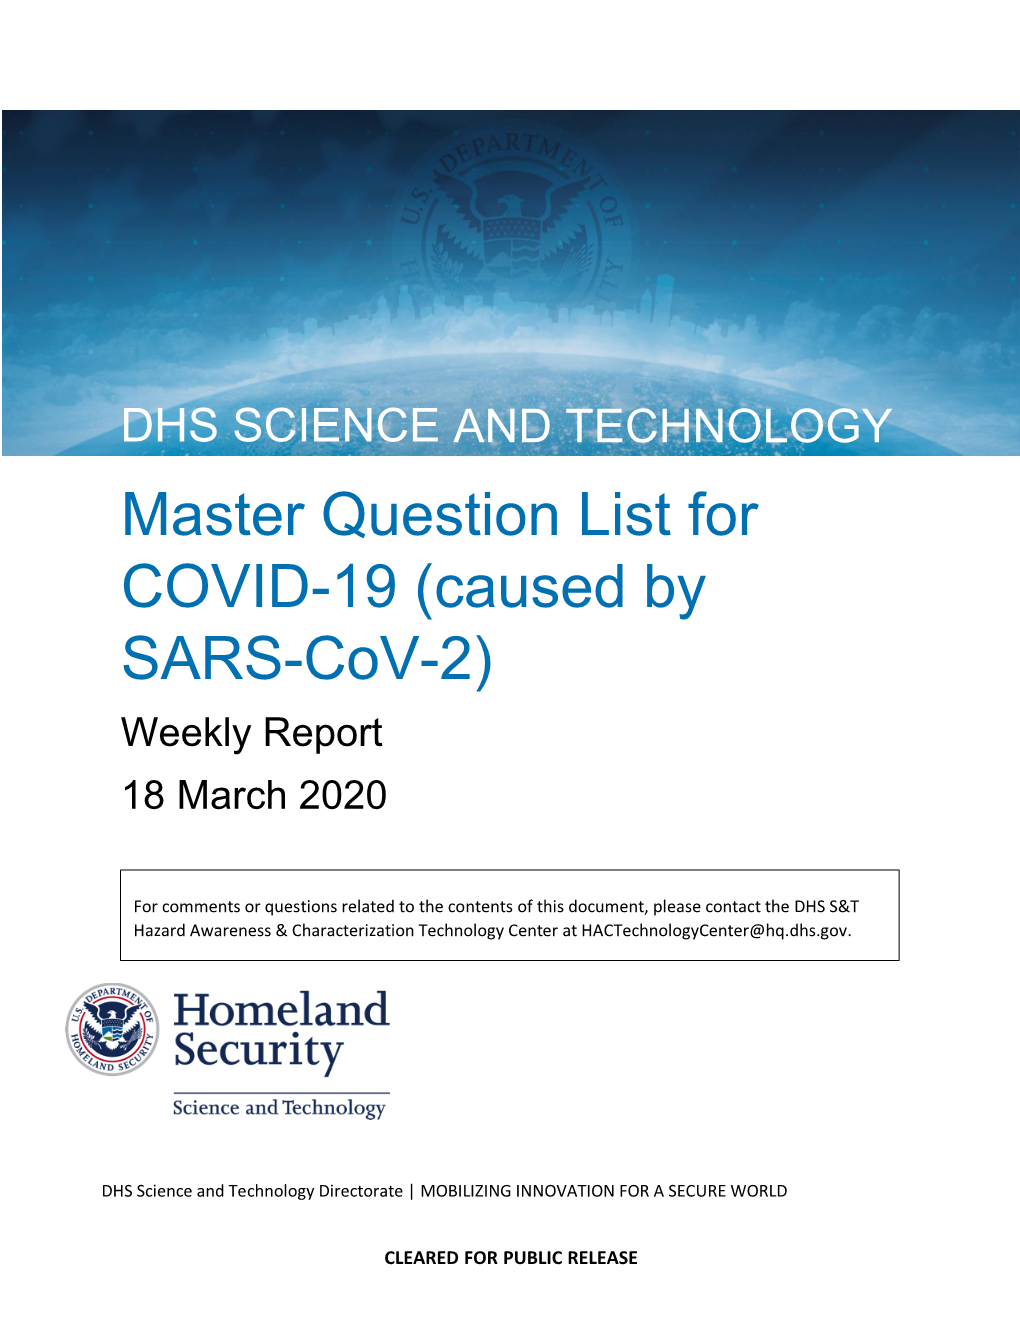 Master Question List for COVID-19 (Caused by SARS-Cov-2) Weekly Report 18 March 2020